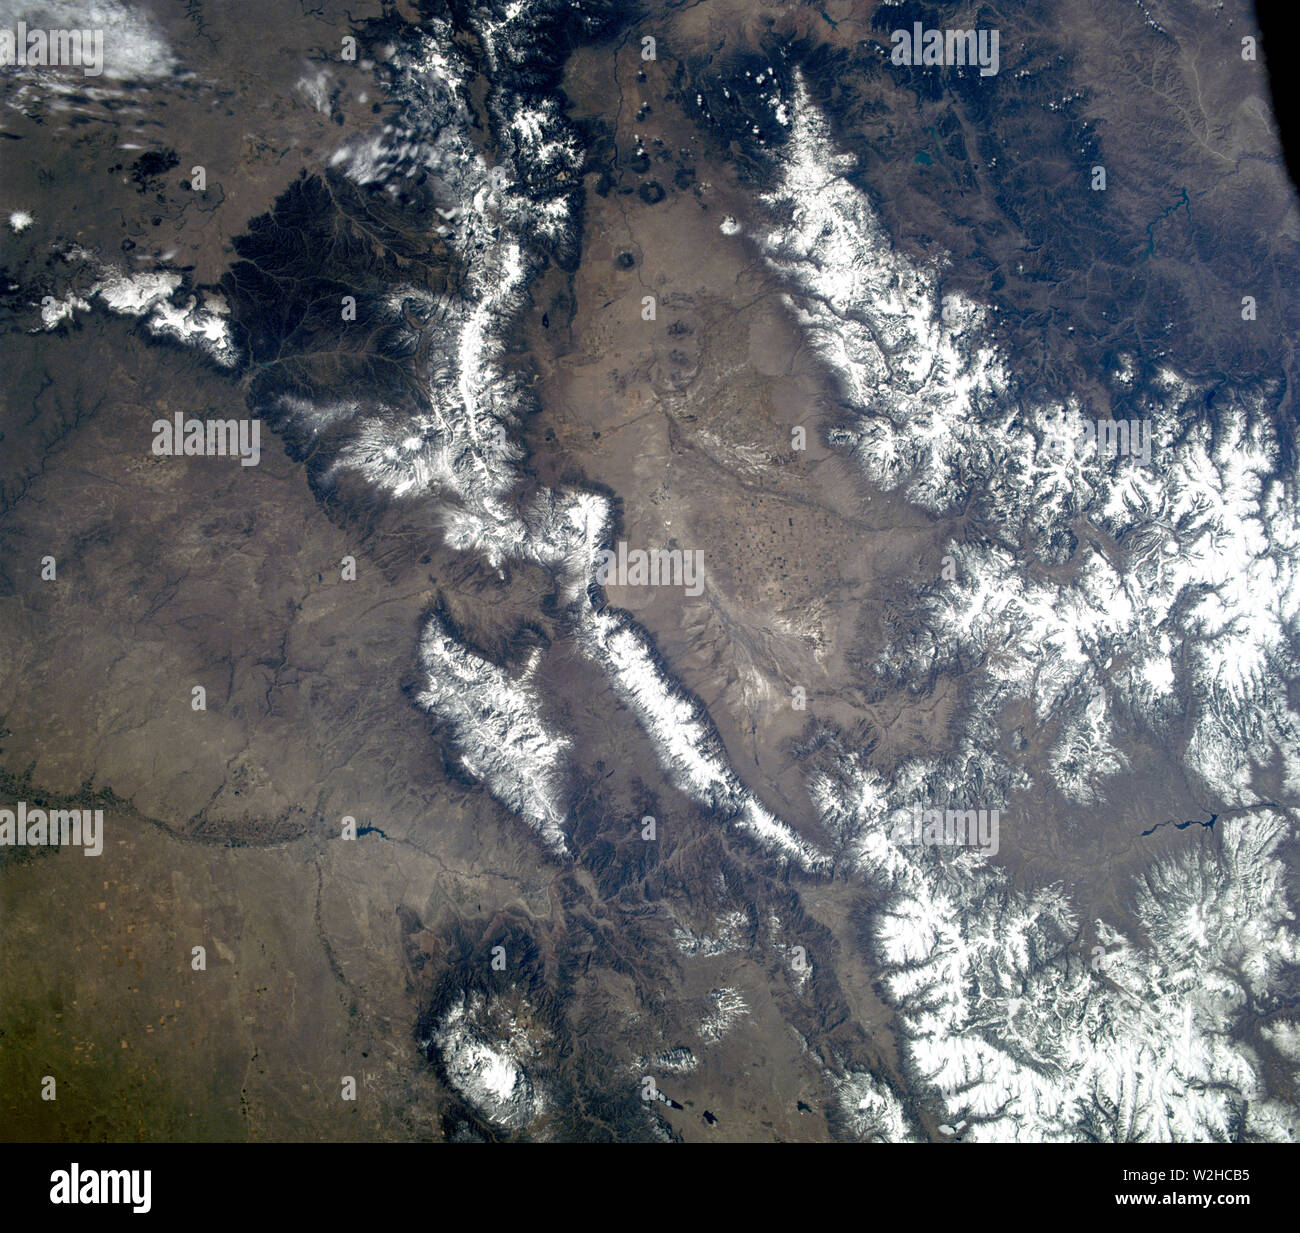 (29 April 1998) --- This view features a 13,980-foot mountain peak in Colorado's Sangre de Cristo Mountains in Saguache County, photographed by crewmembers of the STS-90 Space Shuttle Columbia mission in April 1998. Stock Photo